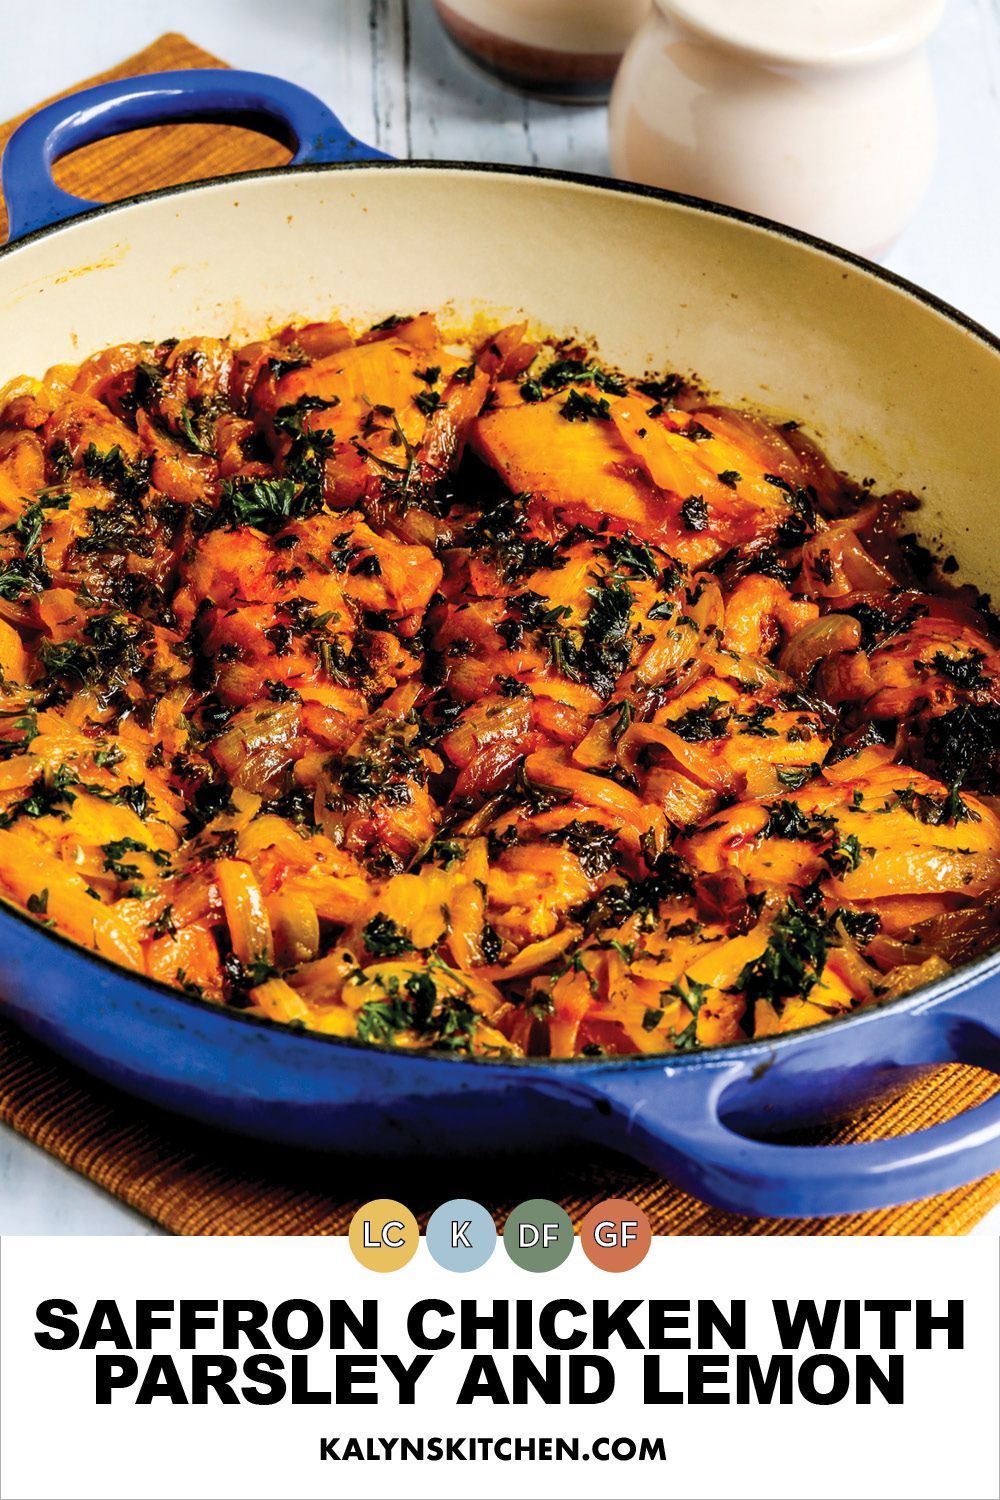 Pinterest image for Saffron Chicken with Parsley and Lemon shown in pan.